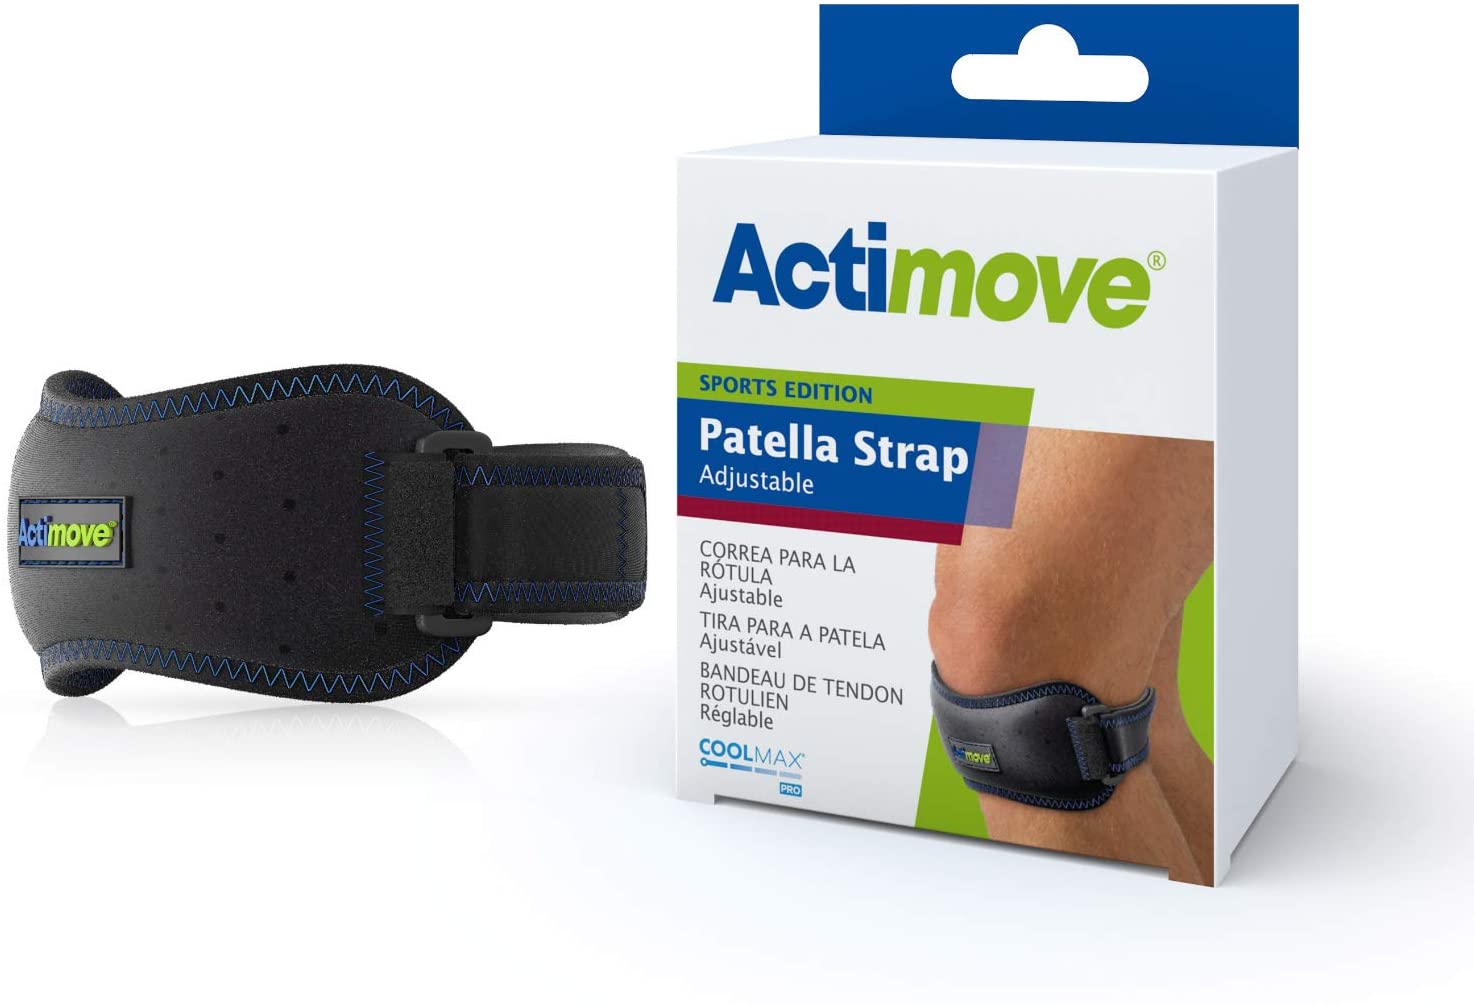 Aids in the relief of Osgood Schlatter Syndrome, improves patella tracking, helps relieve pain.